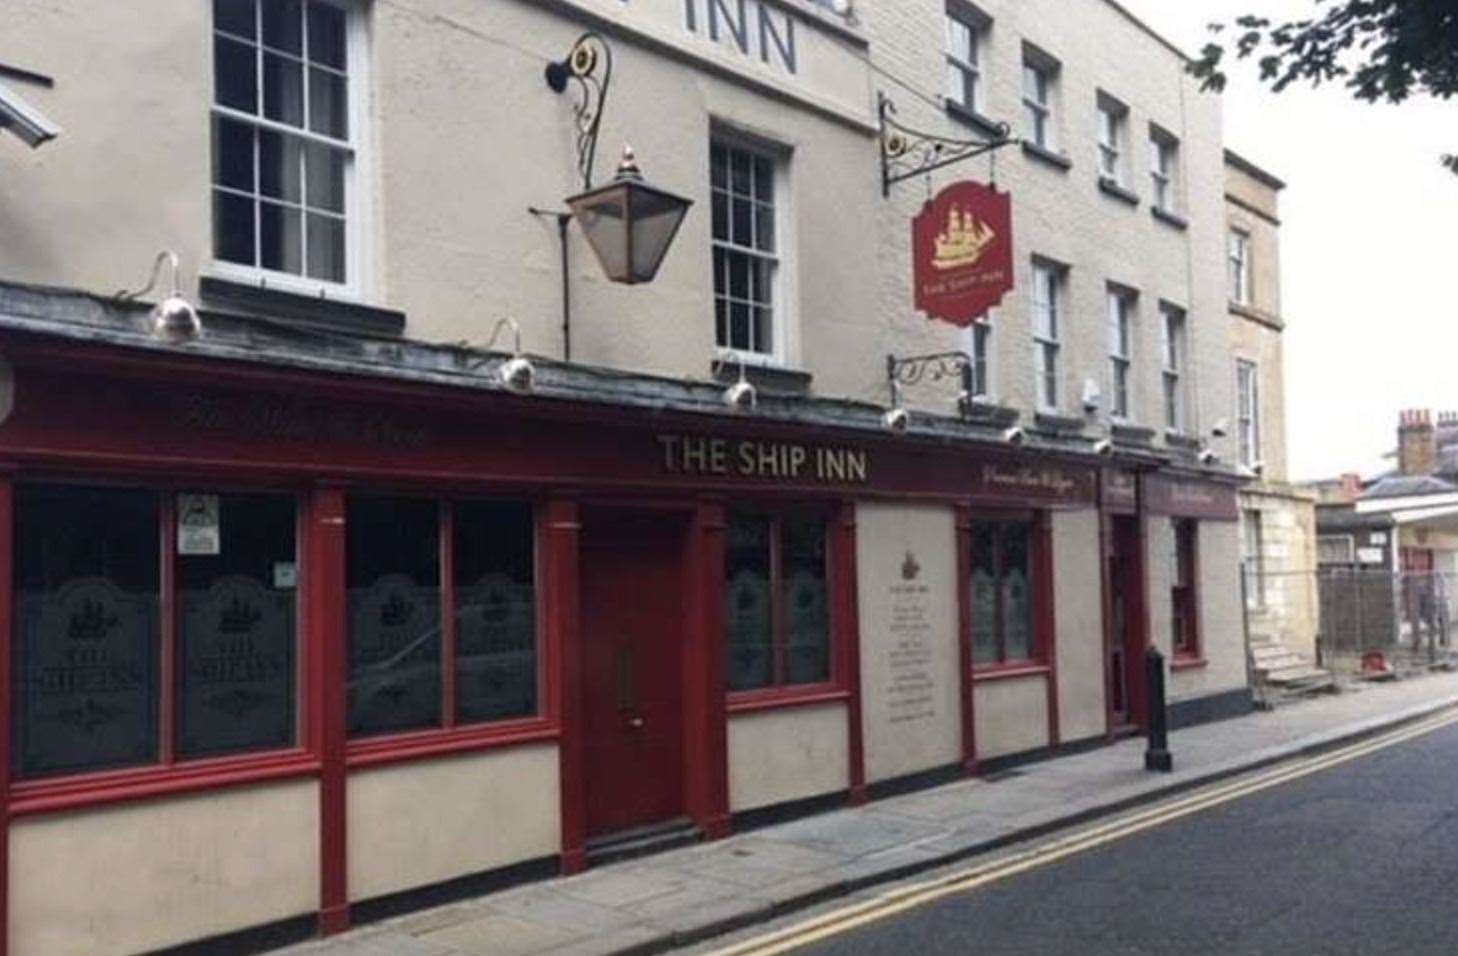 The Ship Inn has over 500 years of history on Rochester High Street